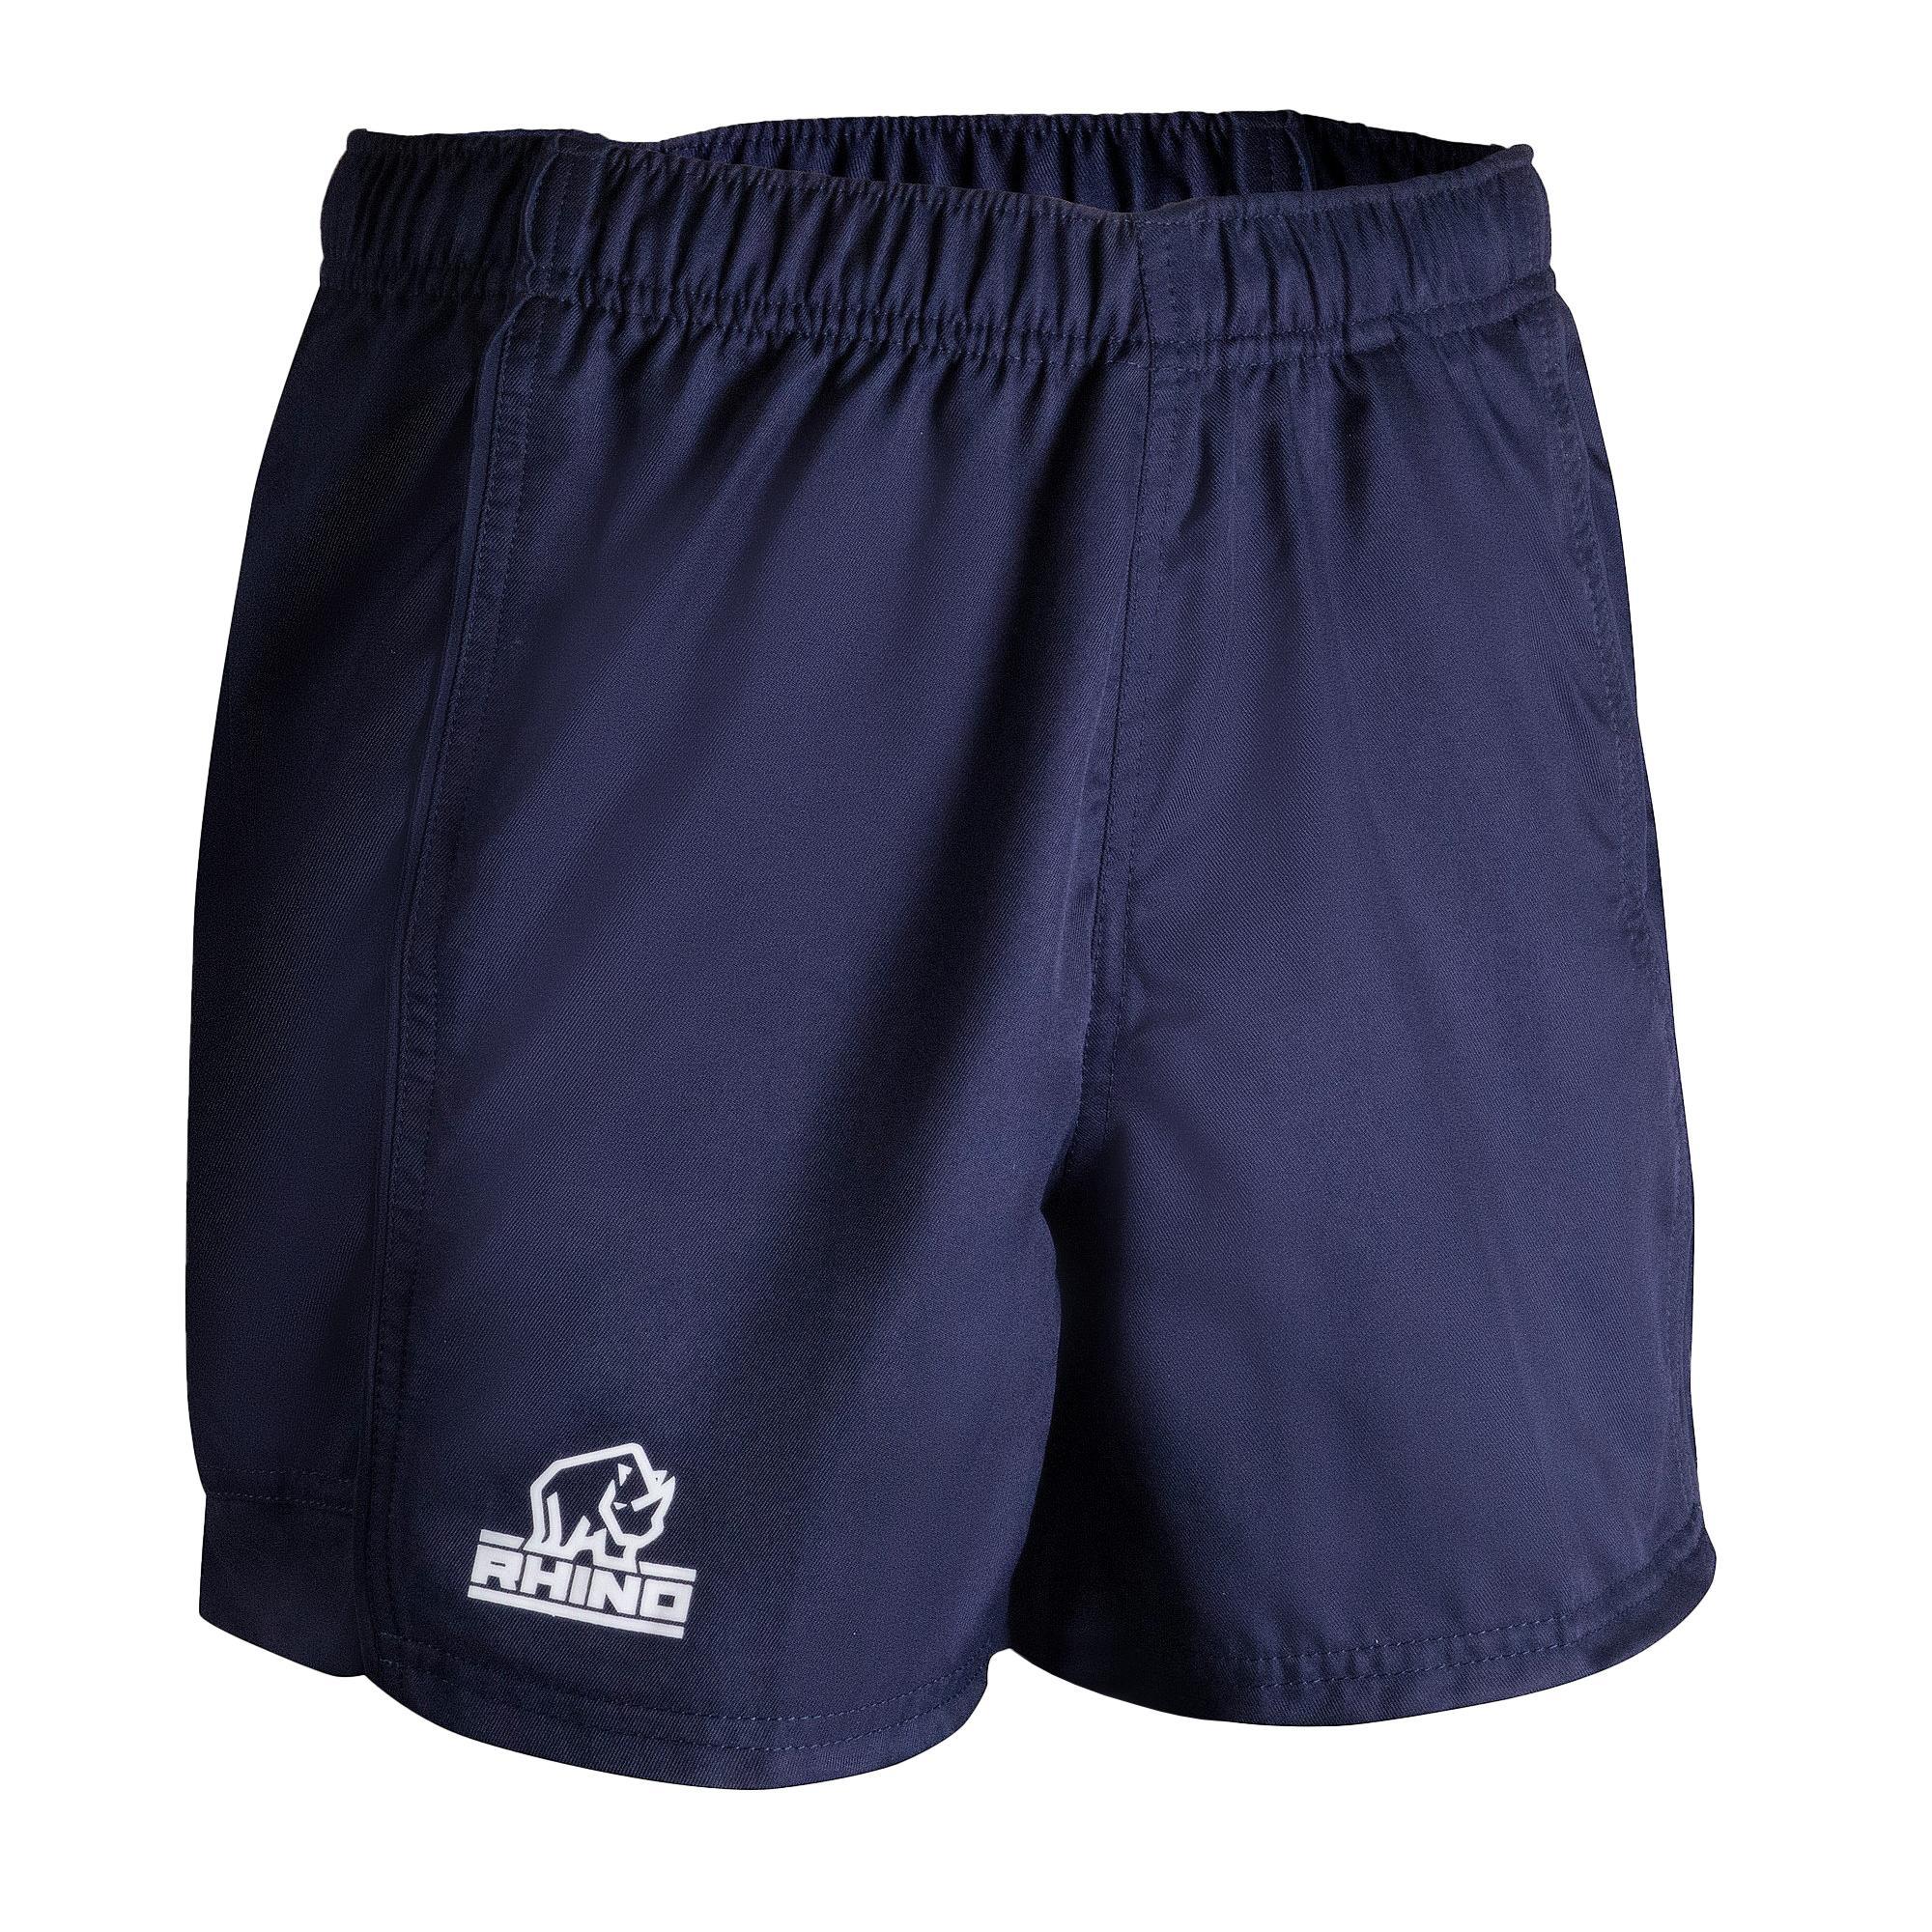 Rhino Childrens/Kids Auckland Rugby Shorts (Navy) (MB)